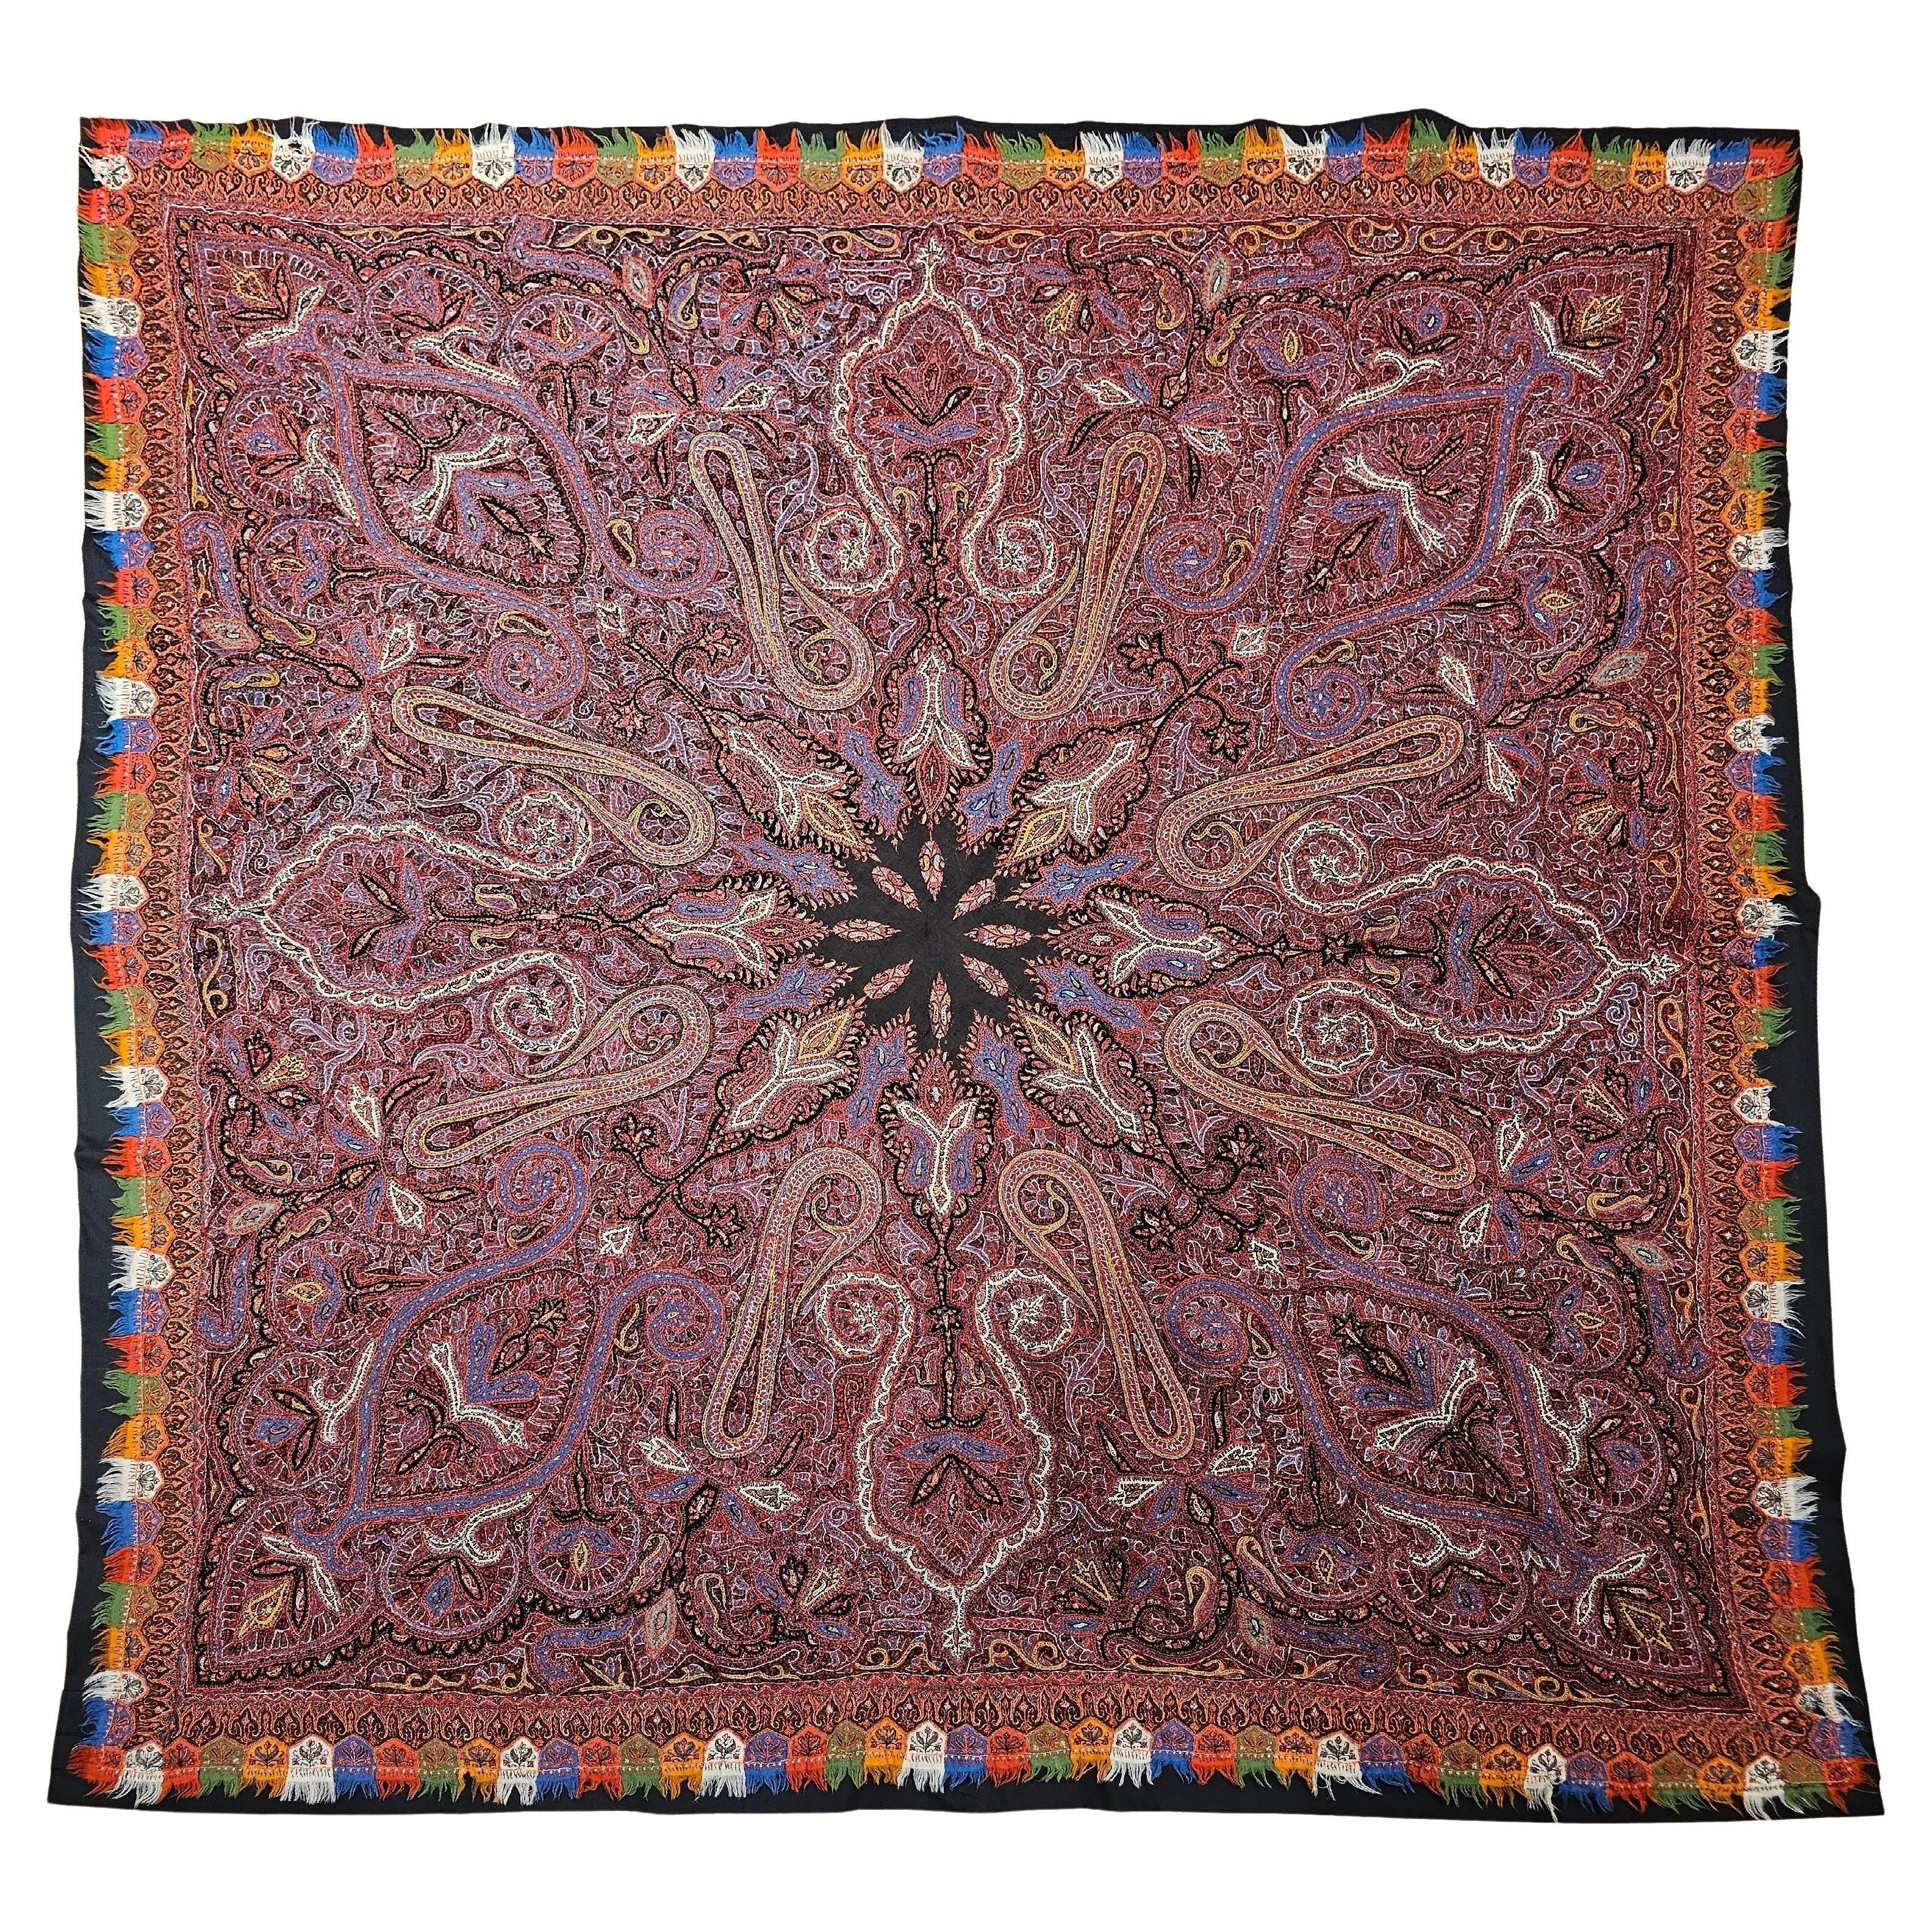 19th Century Hand Embroidered “Kashmiri Pieced Shawl” in Brick Red, Black, Blue For Sale